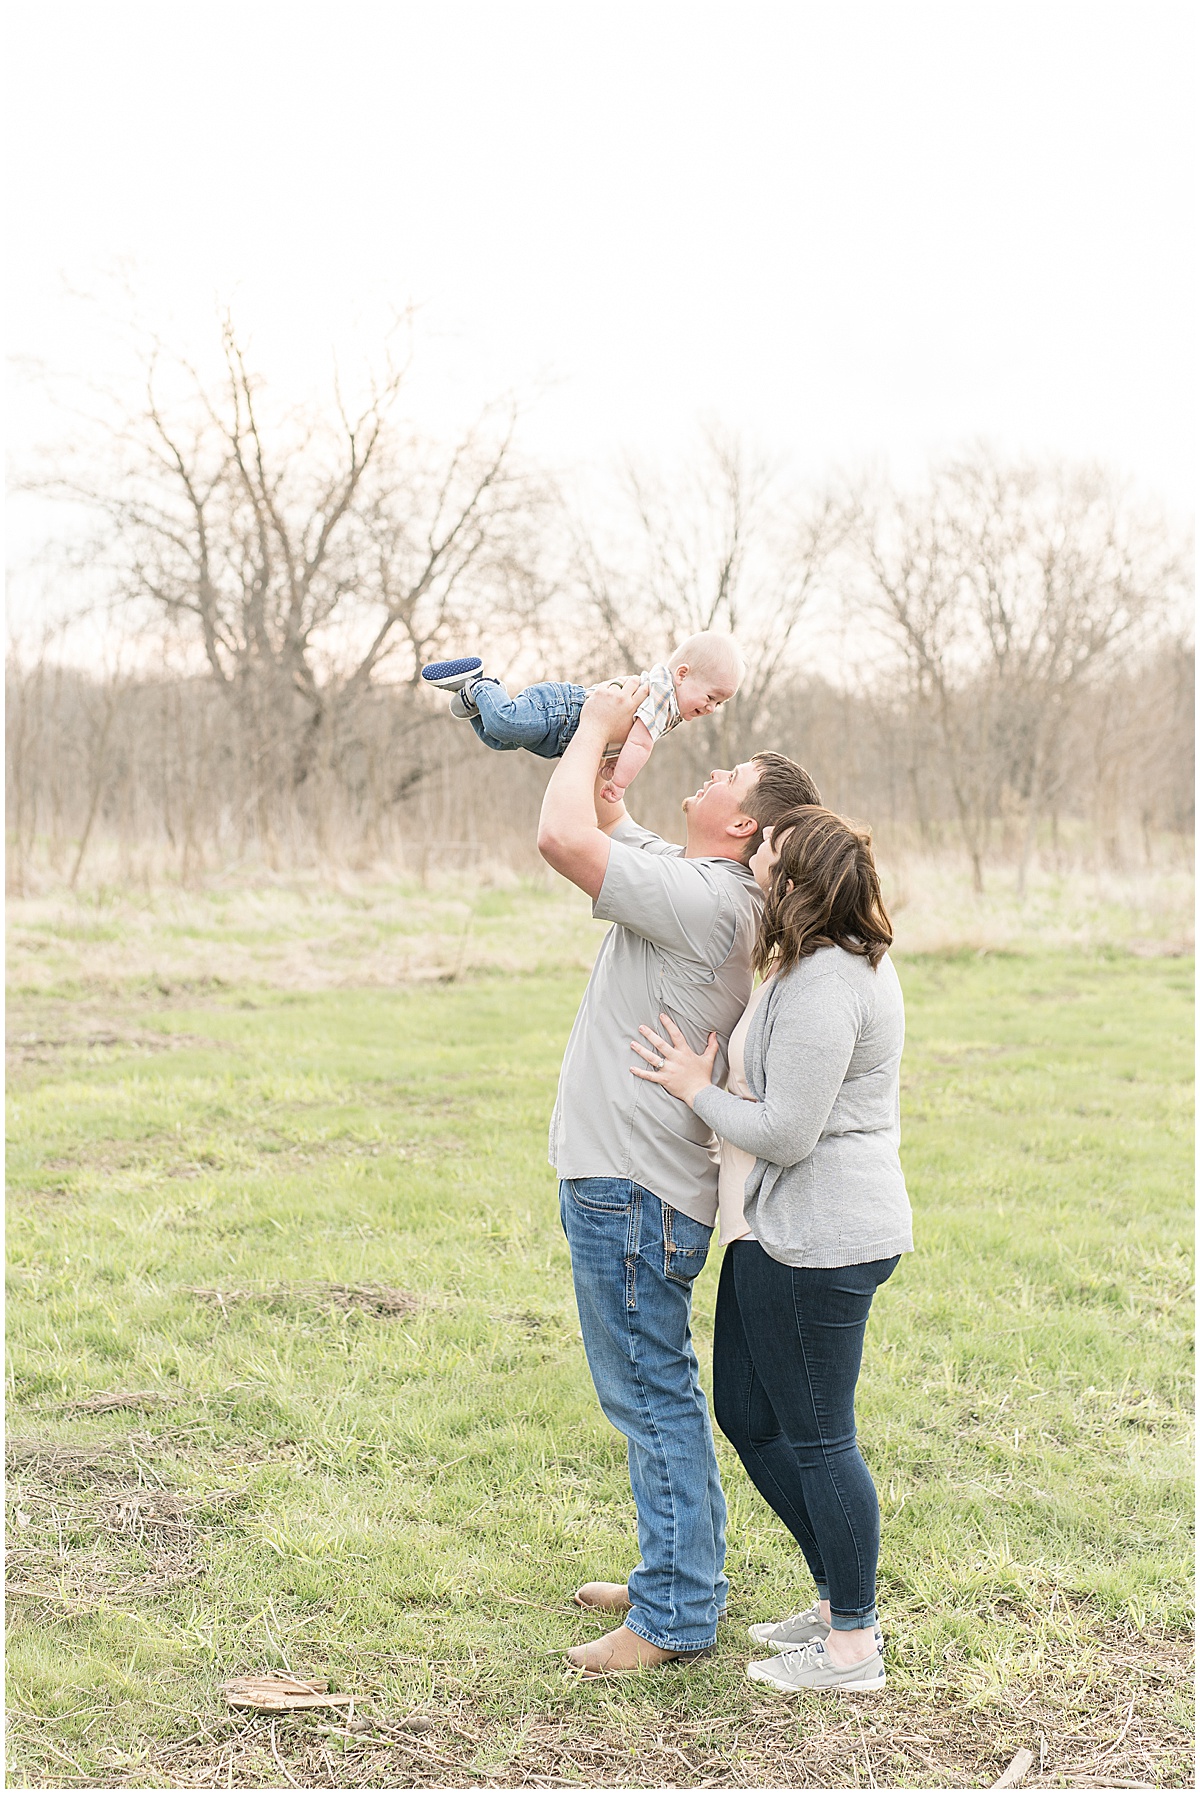 Six-month photos at McAllister Park in Lafayette, Indiana